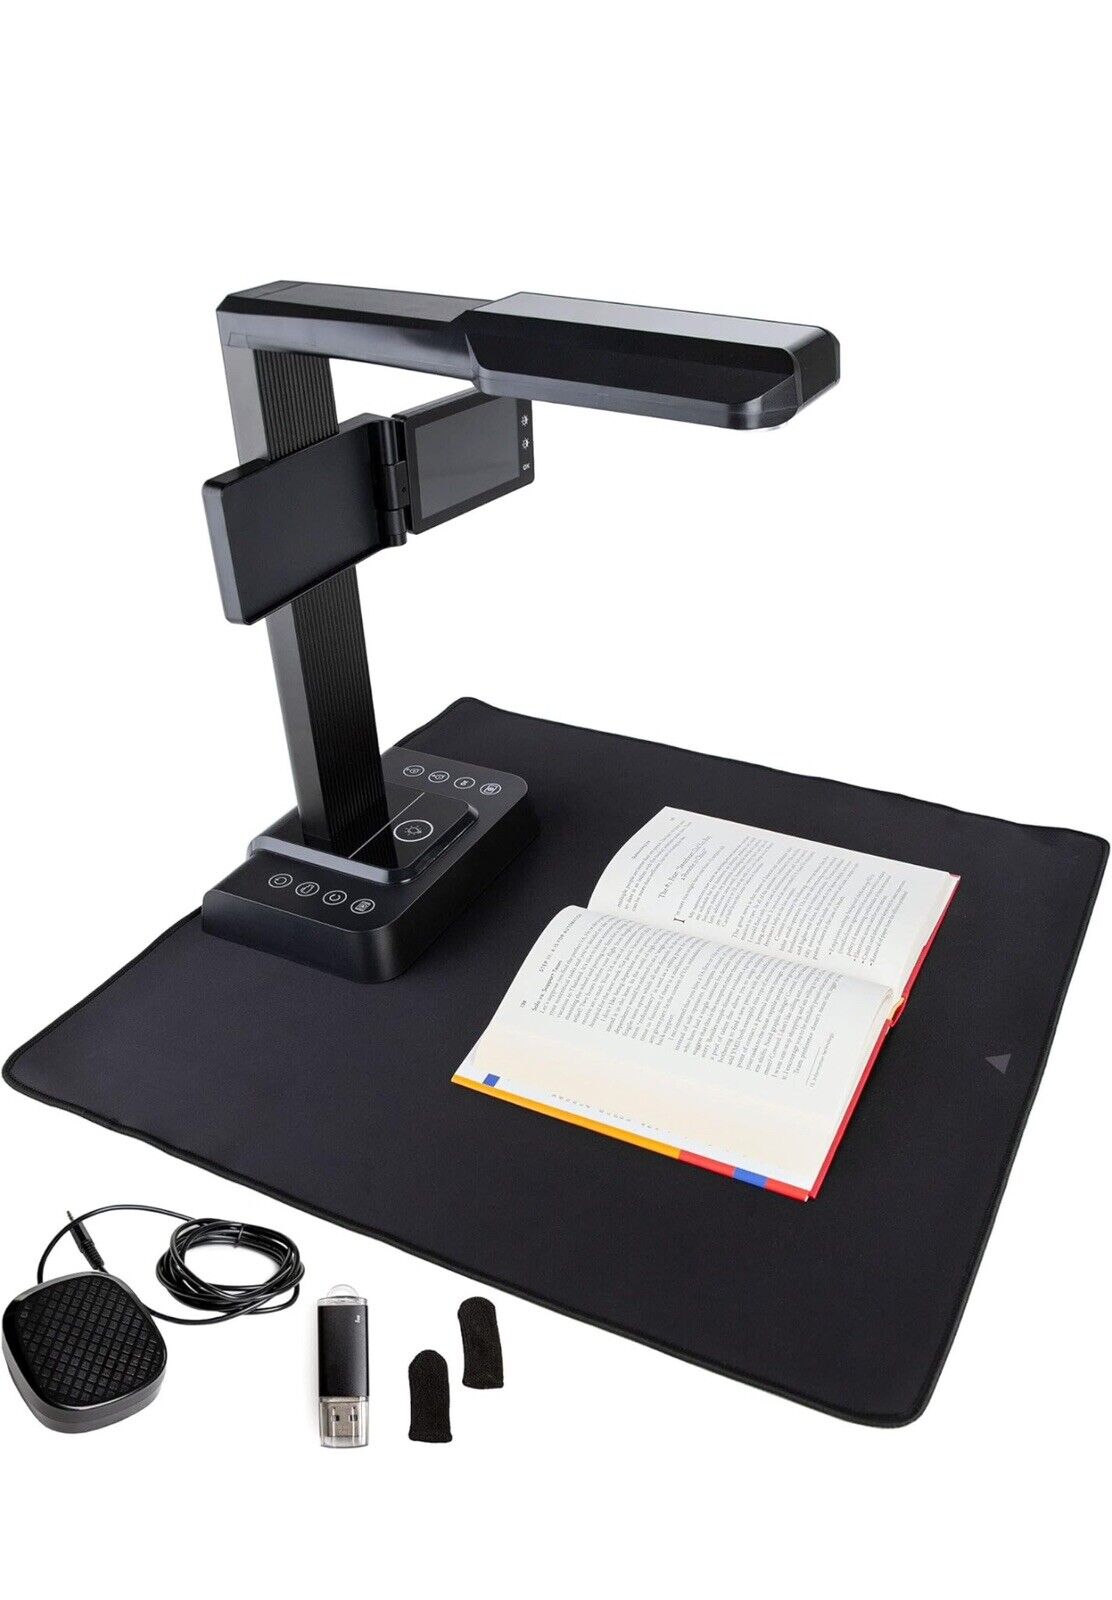 A3 A4 12MP Large Format Book & Document Scanner Smart Capture Size USB Camera US